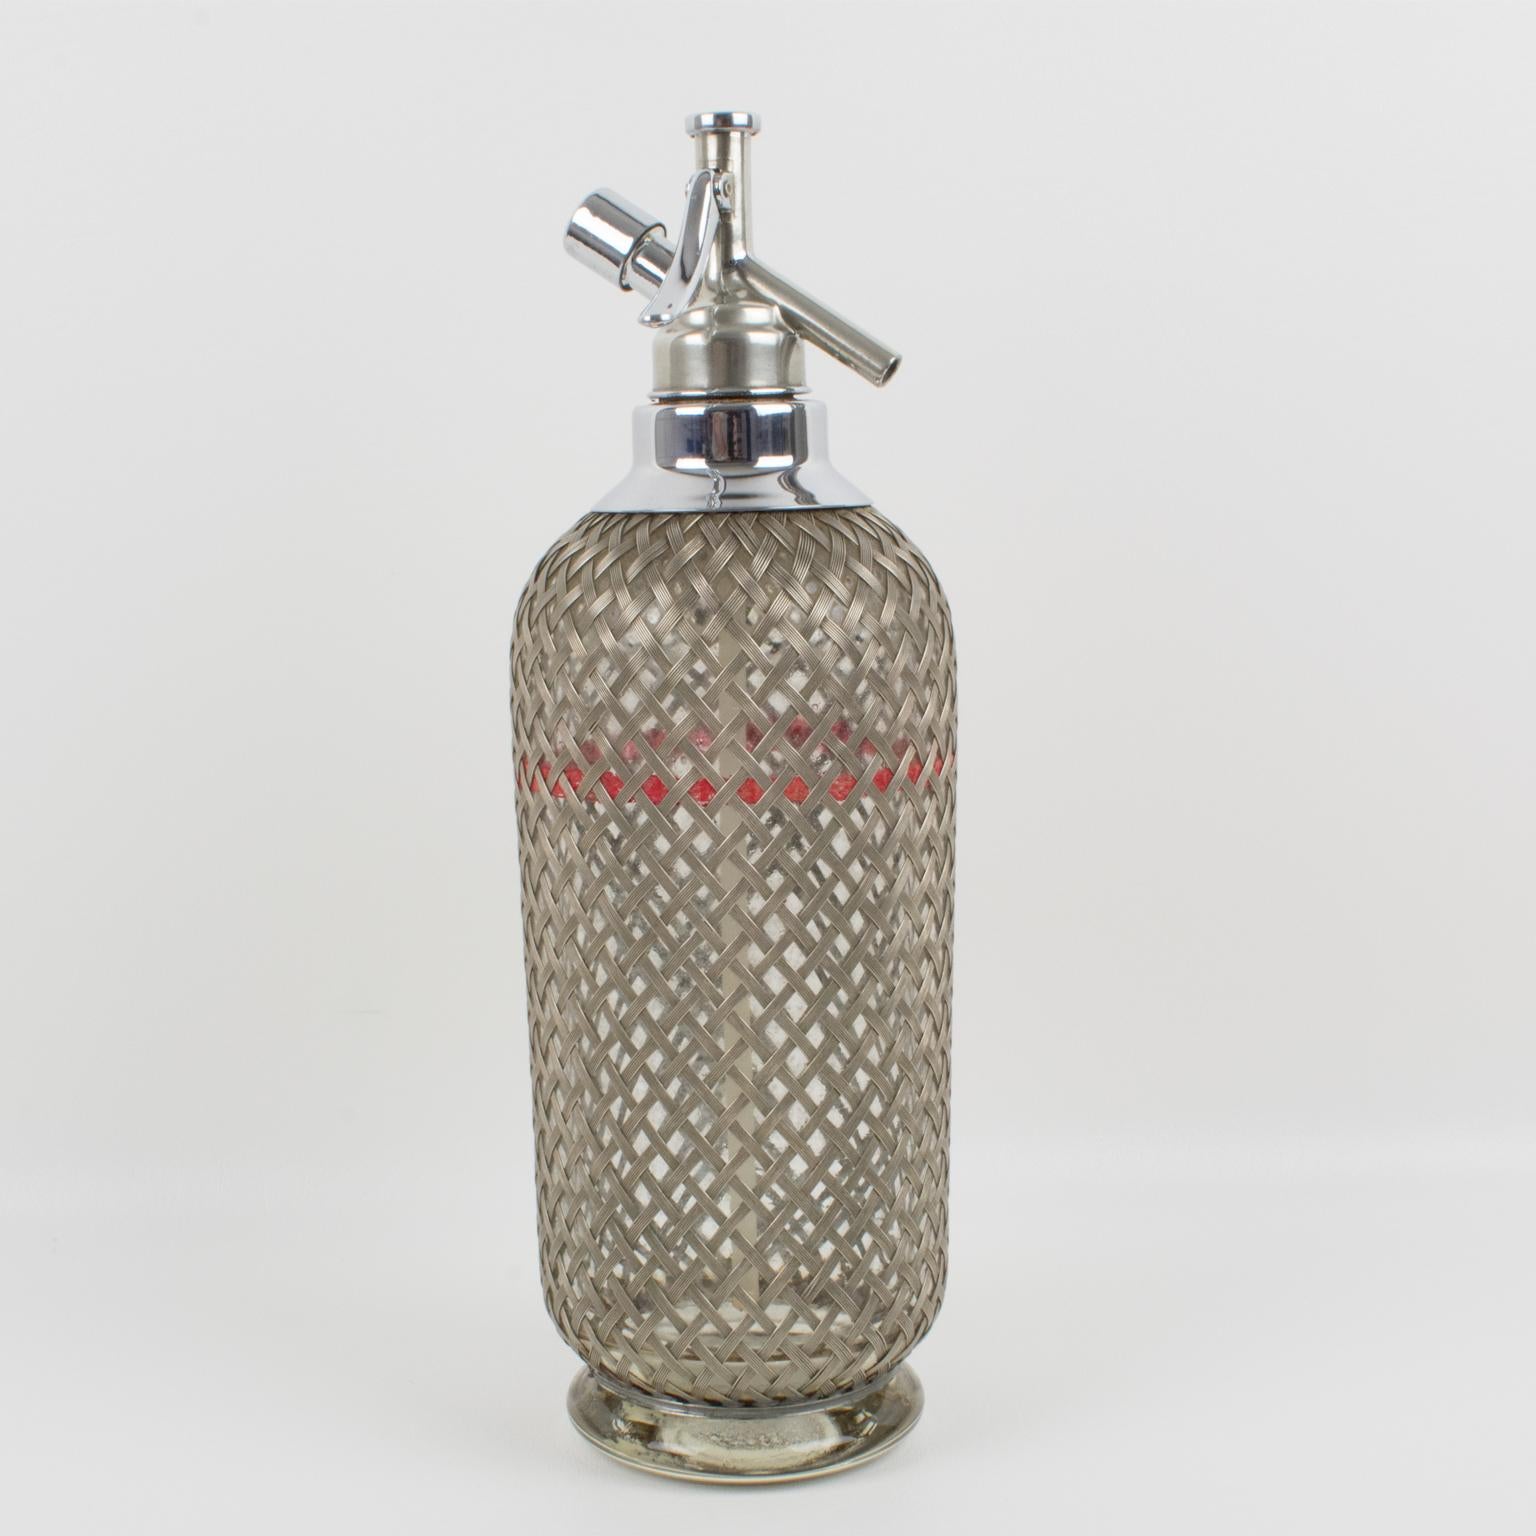 An original soda (Seltzer water) siphon glass bottle with metal wicker wire mesh protection by Sparklets Ltd, London. Featuring the pre-war European cocktail culture, those bottles, mainly used in cafes and restaurants once came in a variety of